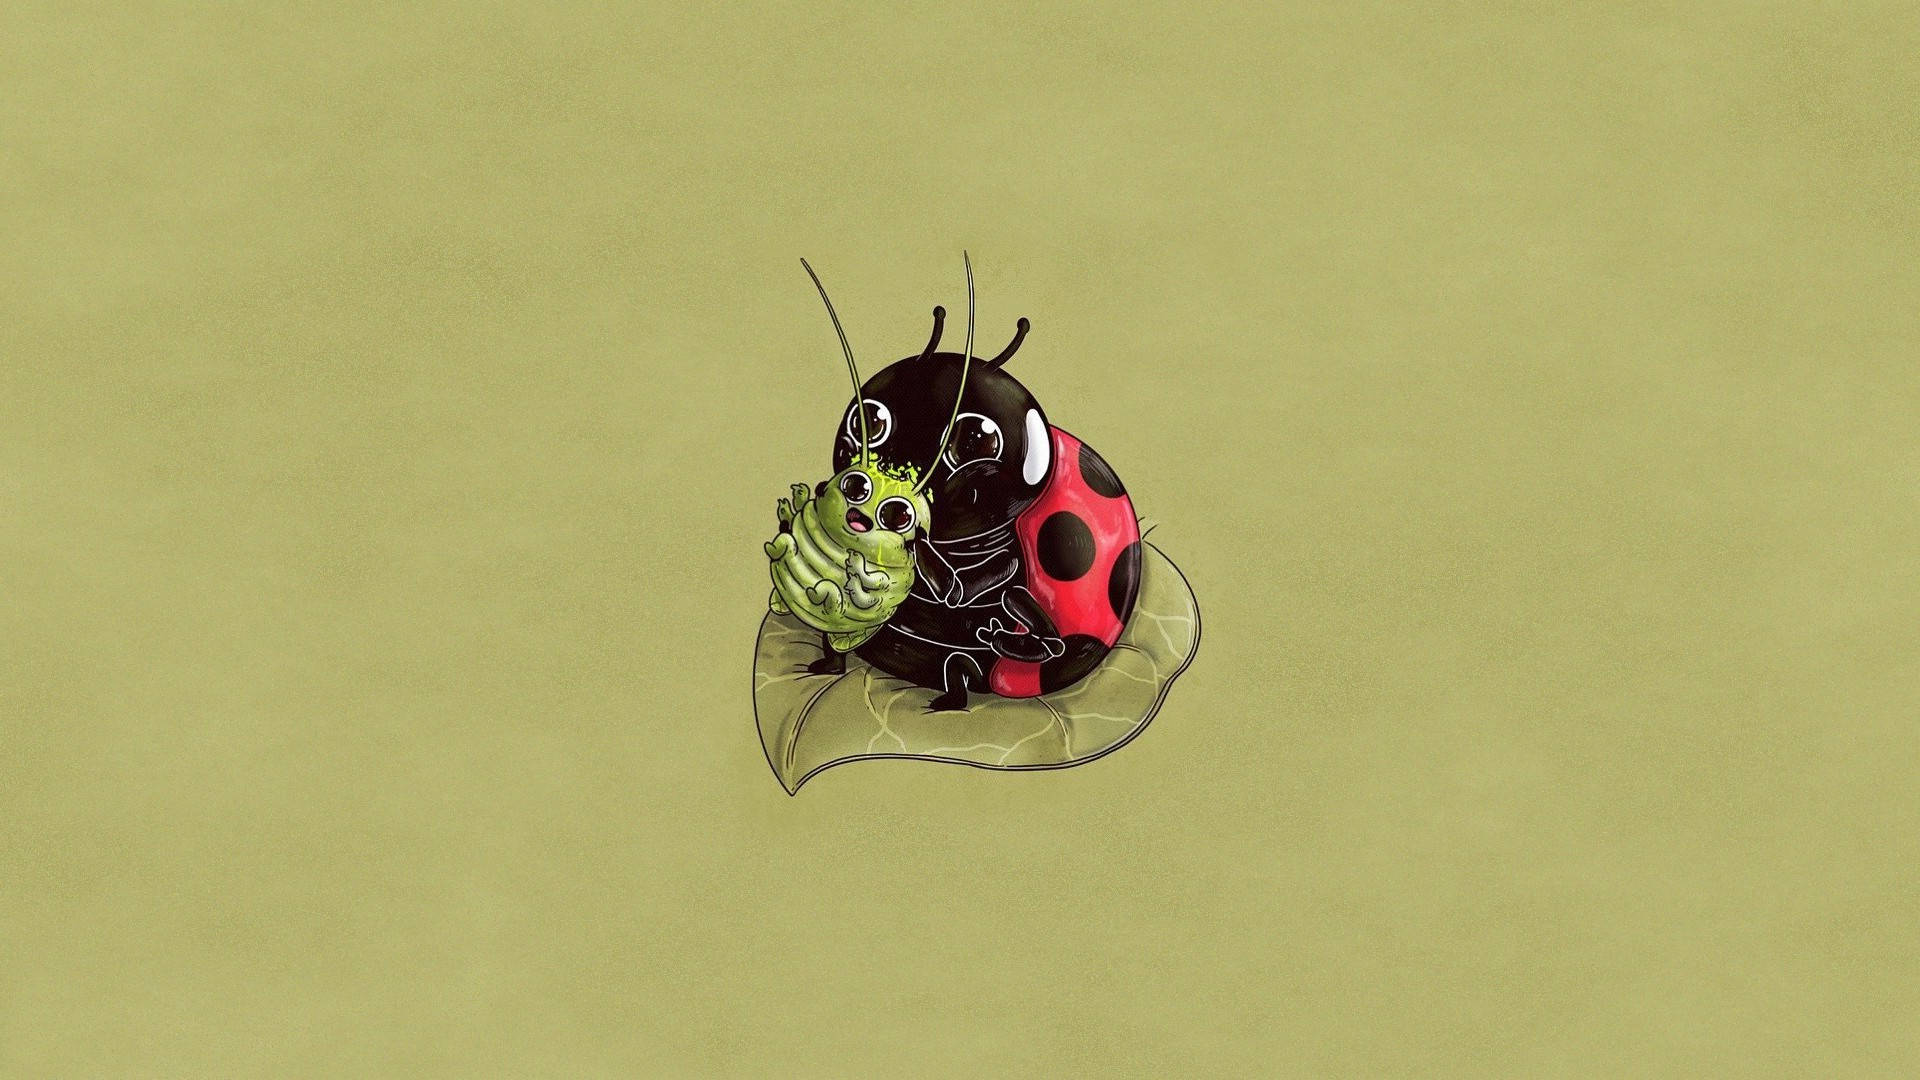 Ladybug Beetle In The Adorable Circle Of Life Picture